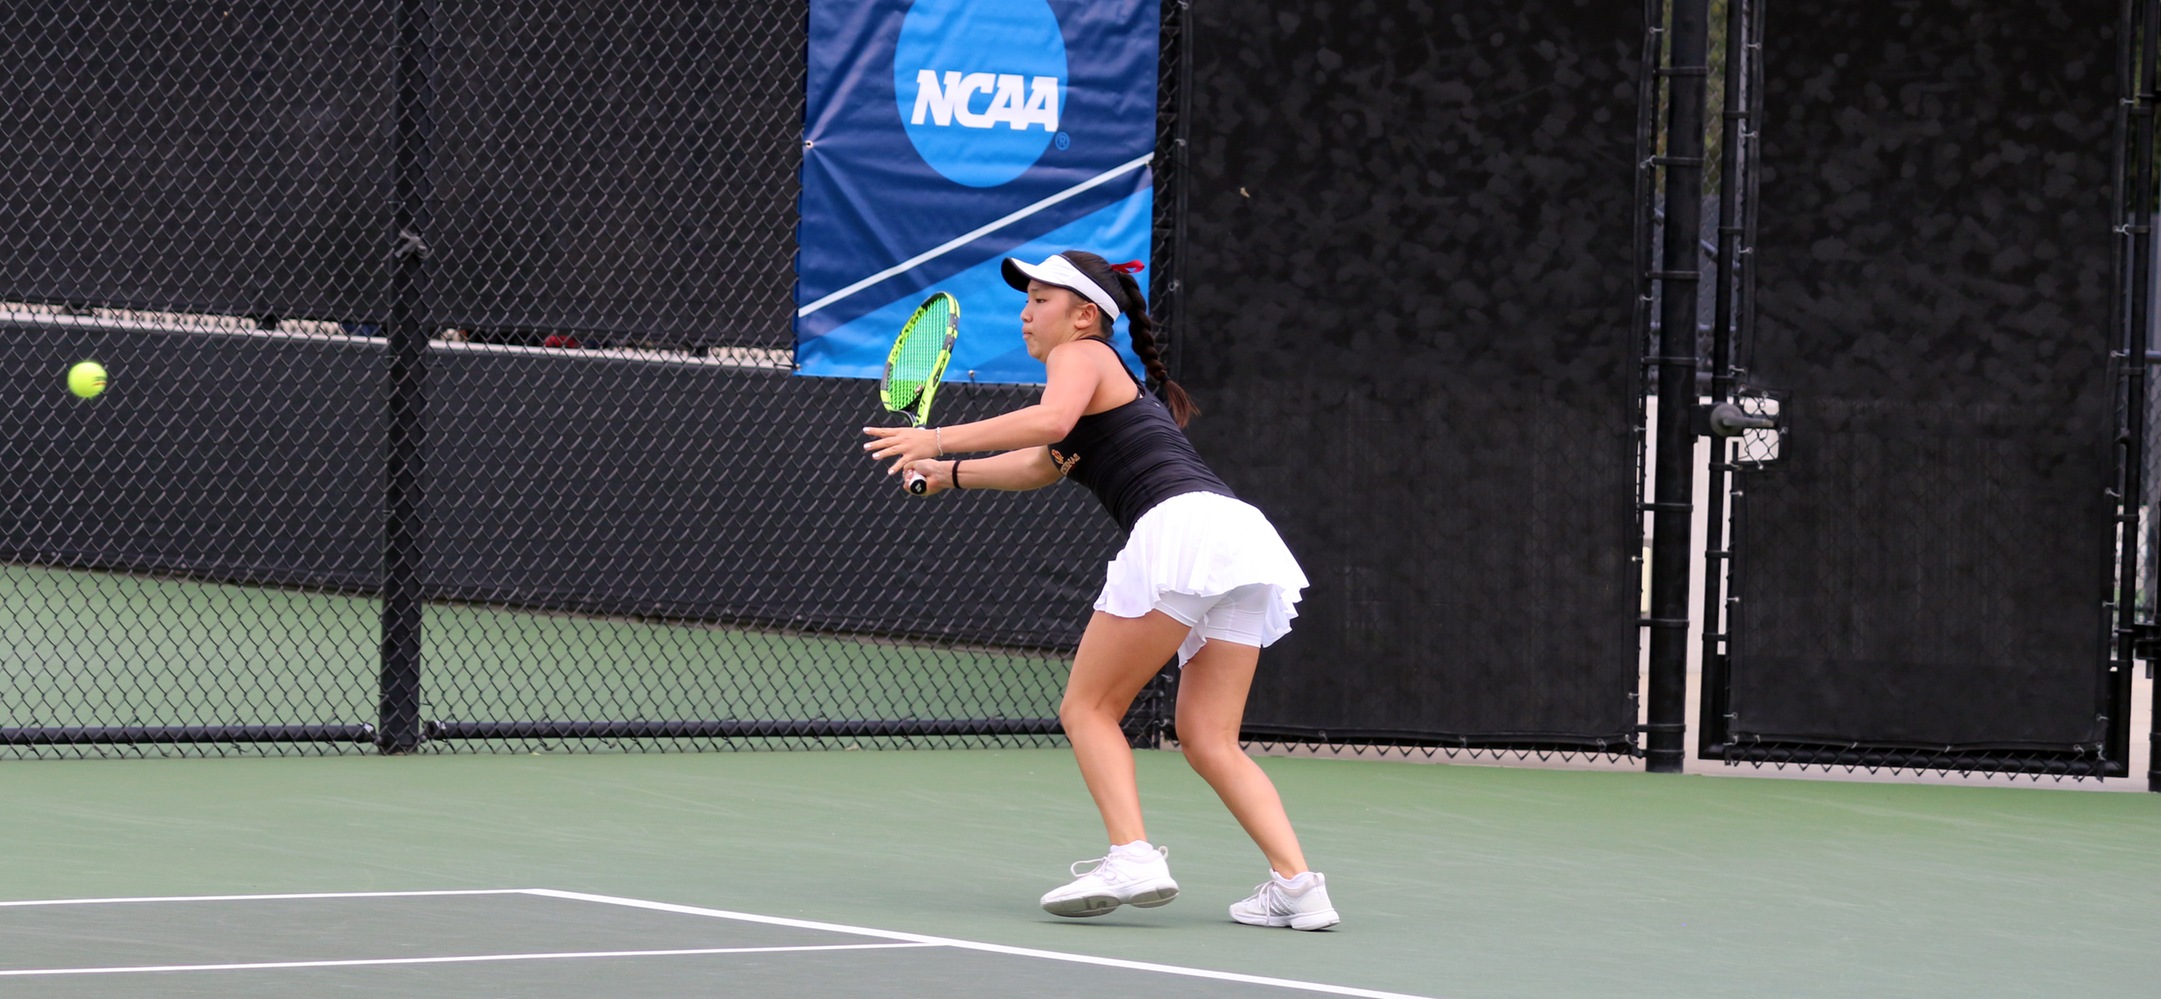 Sydney Lee won 6-0, 6-0 in singles and 8-3 in doubles as the Athenas opened NCAA play with a 5-0 win